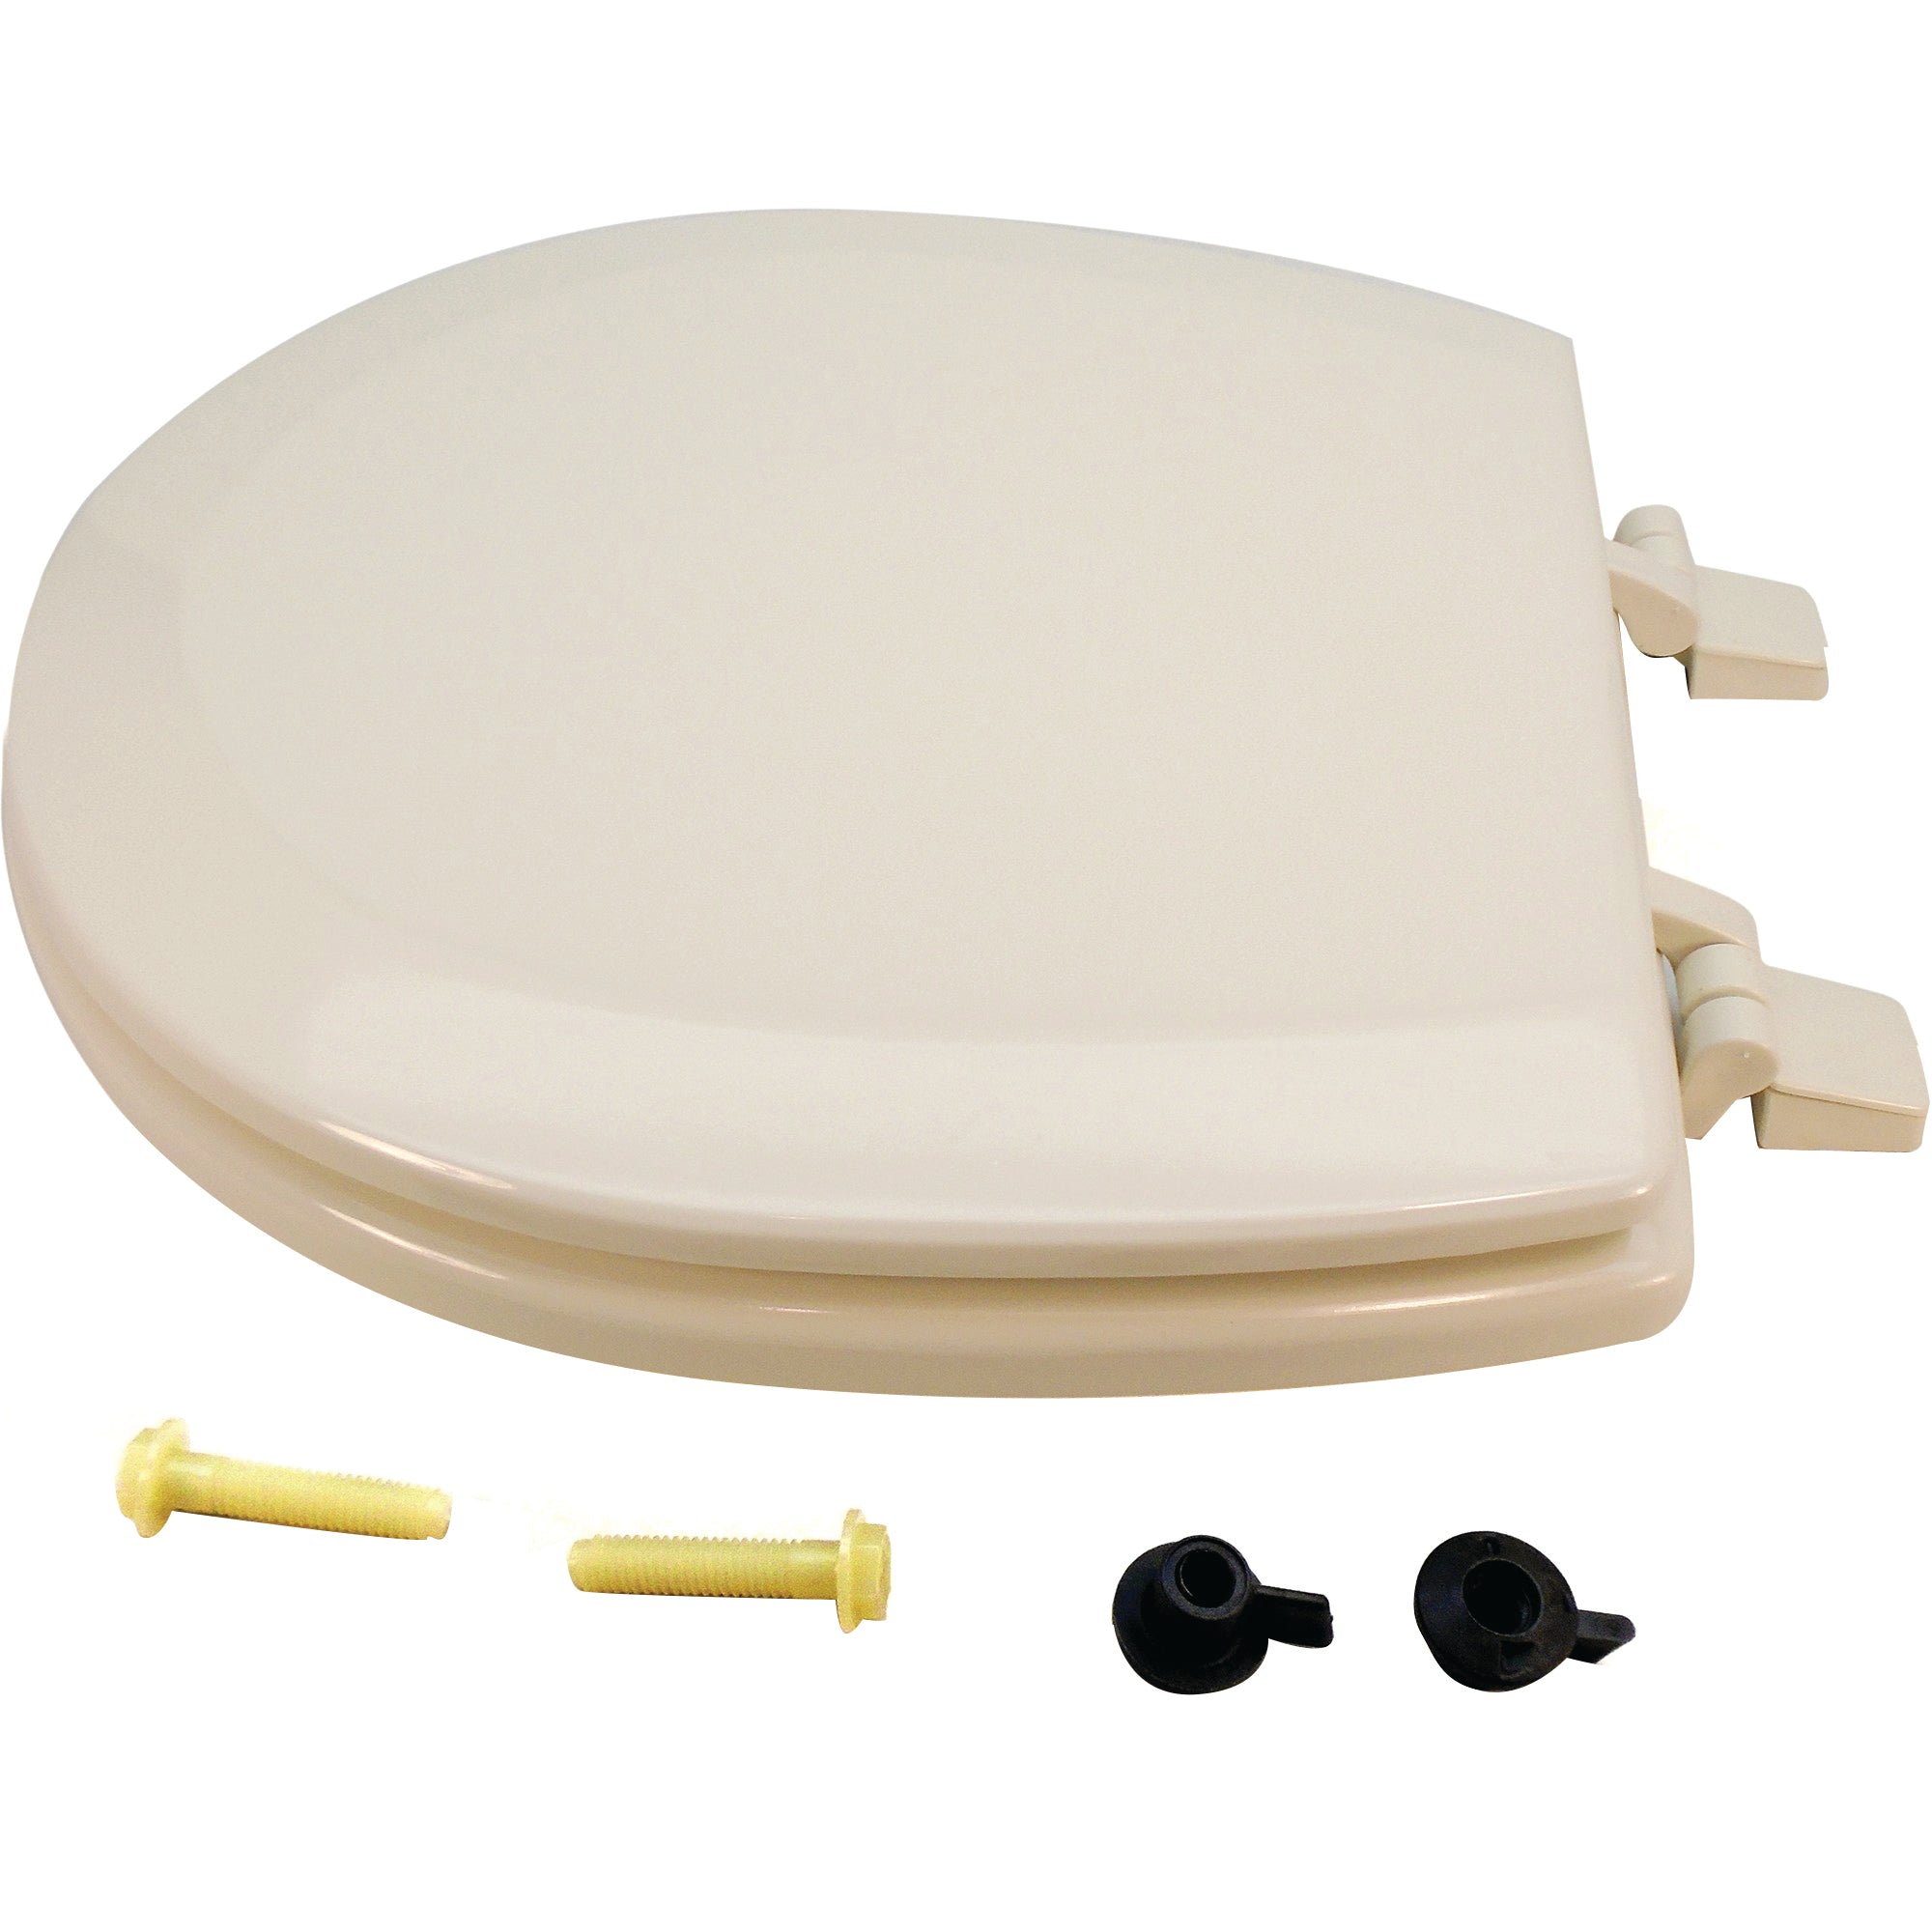 Dometic 385344437 Seat and Lid Assembly - Bone